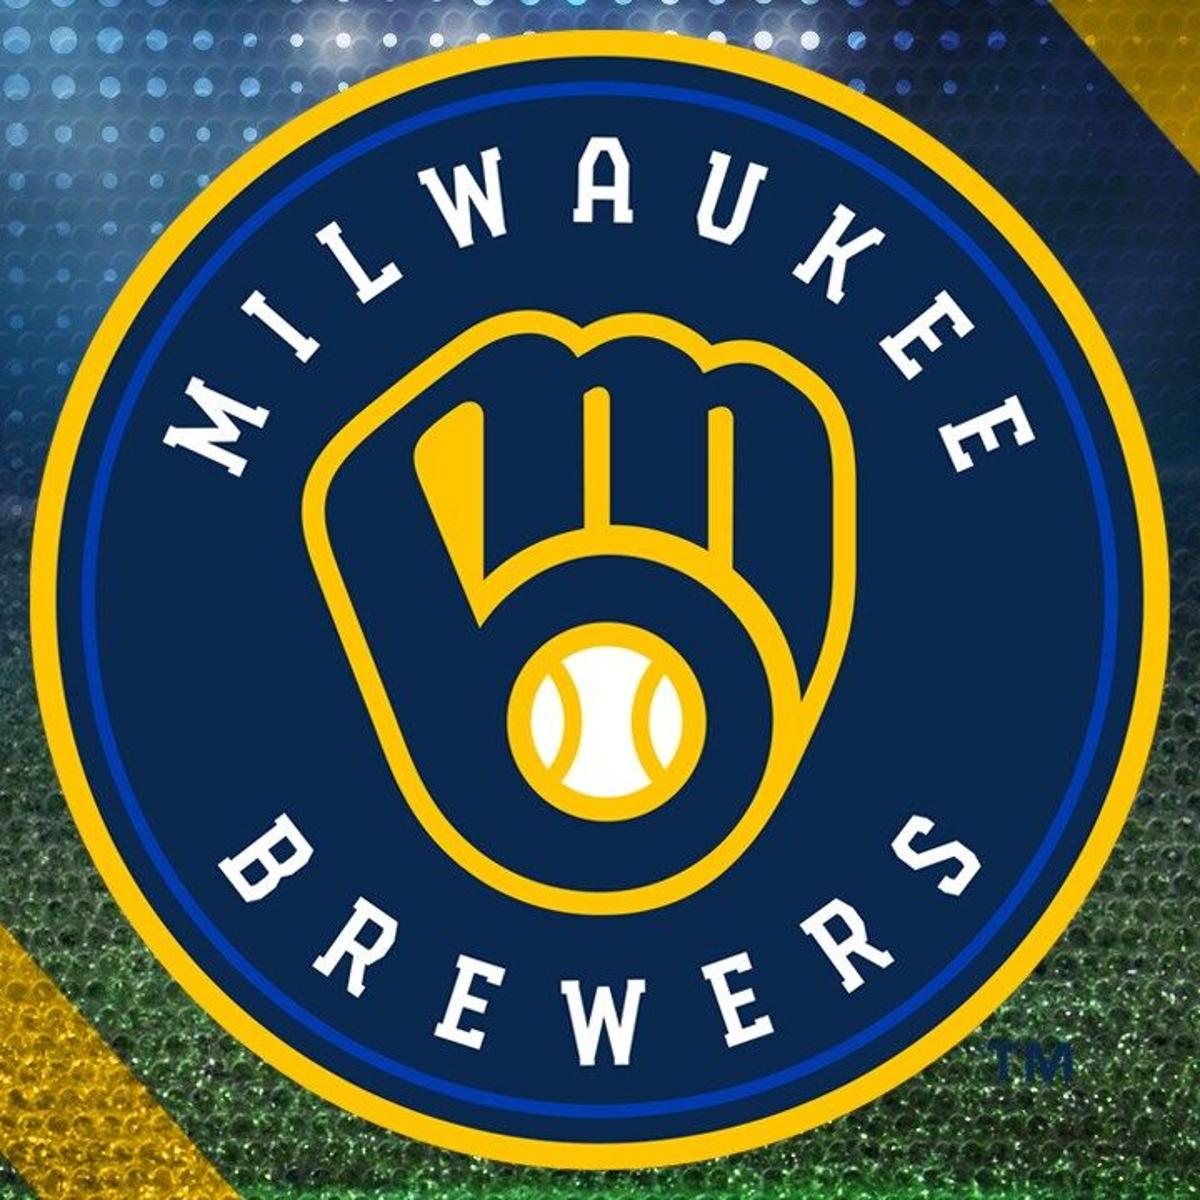 Milwaukee Brewers 2022 Schedule Brewers Unveil 2022 Season Schedule | Brewers | Waow.com